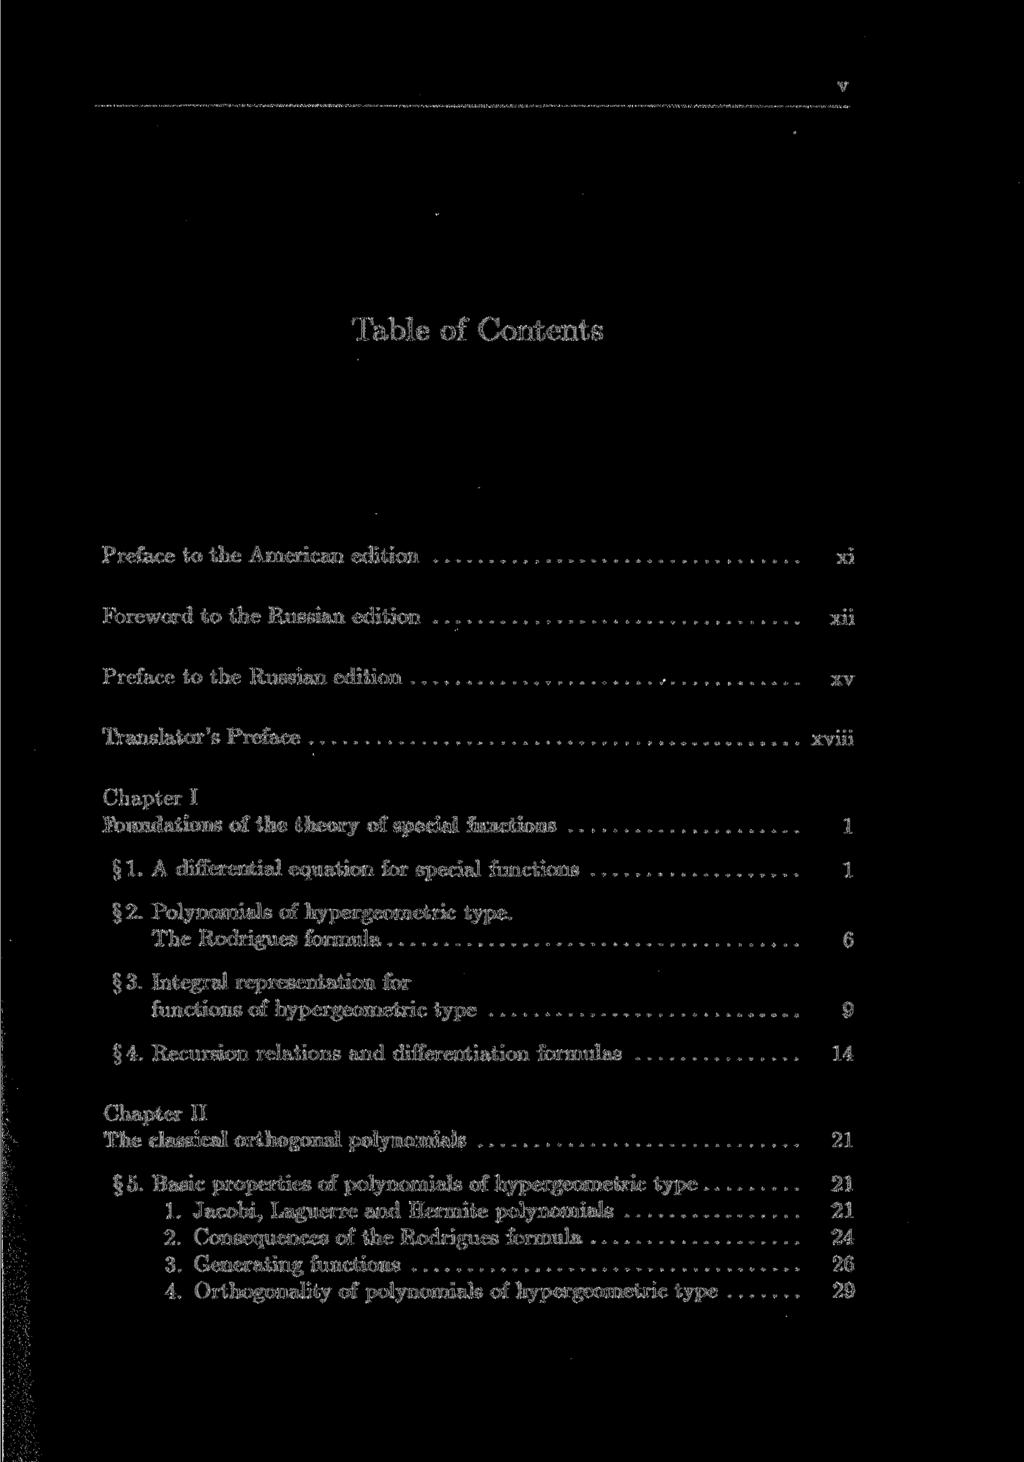 Table of Contents Preface to the American edition xi Foreword to the Russian edition xii Preface to the Russian edition xv Translator's Preface xviii Chapter I Foundations of the theory of special